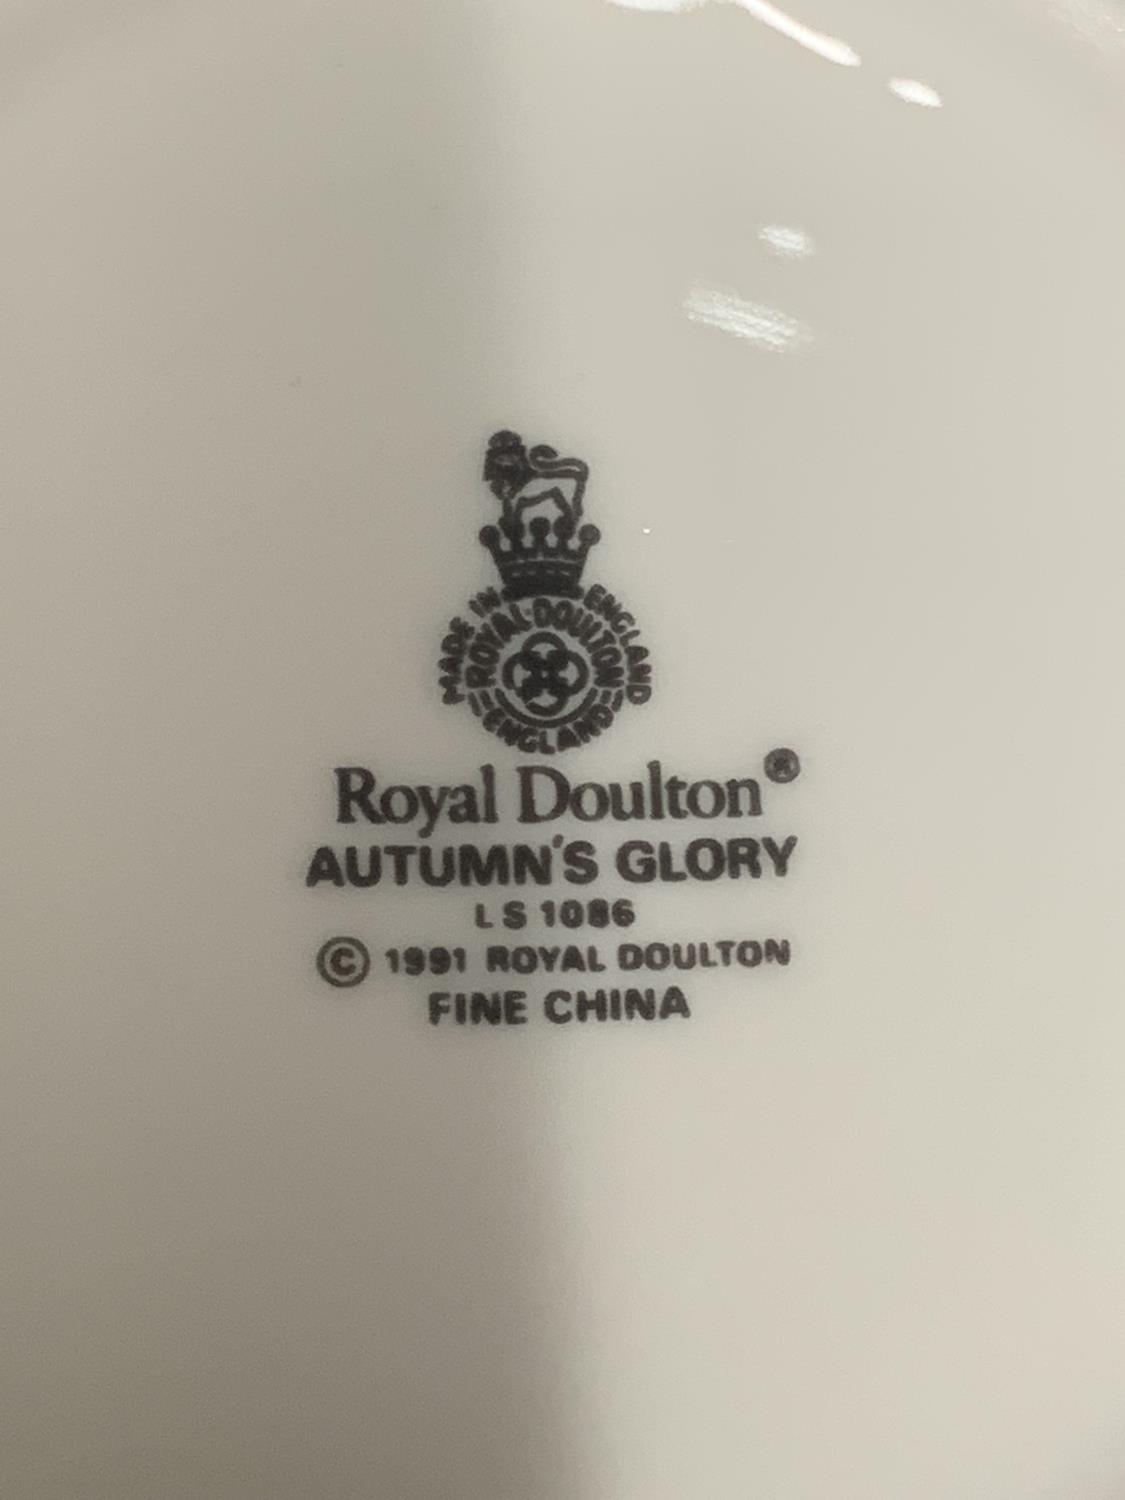 A ROYAL DOULTON 'AUTUMN'S GLORY' TEASET TO INCLUDE A TEAPOT, CREAM JUG, SUGAR BOWL, CUPS, SAUCERS - Image 4 of 4